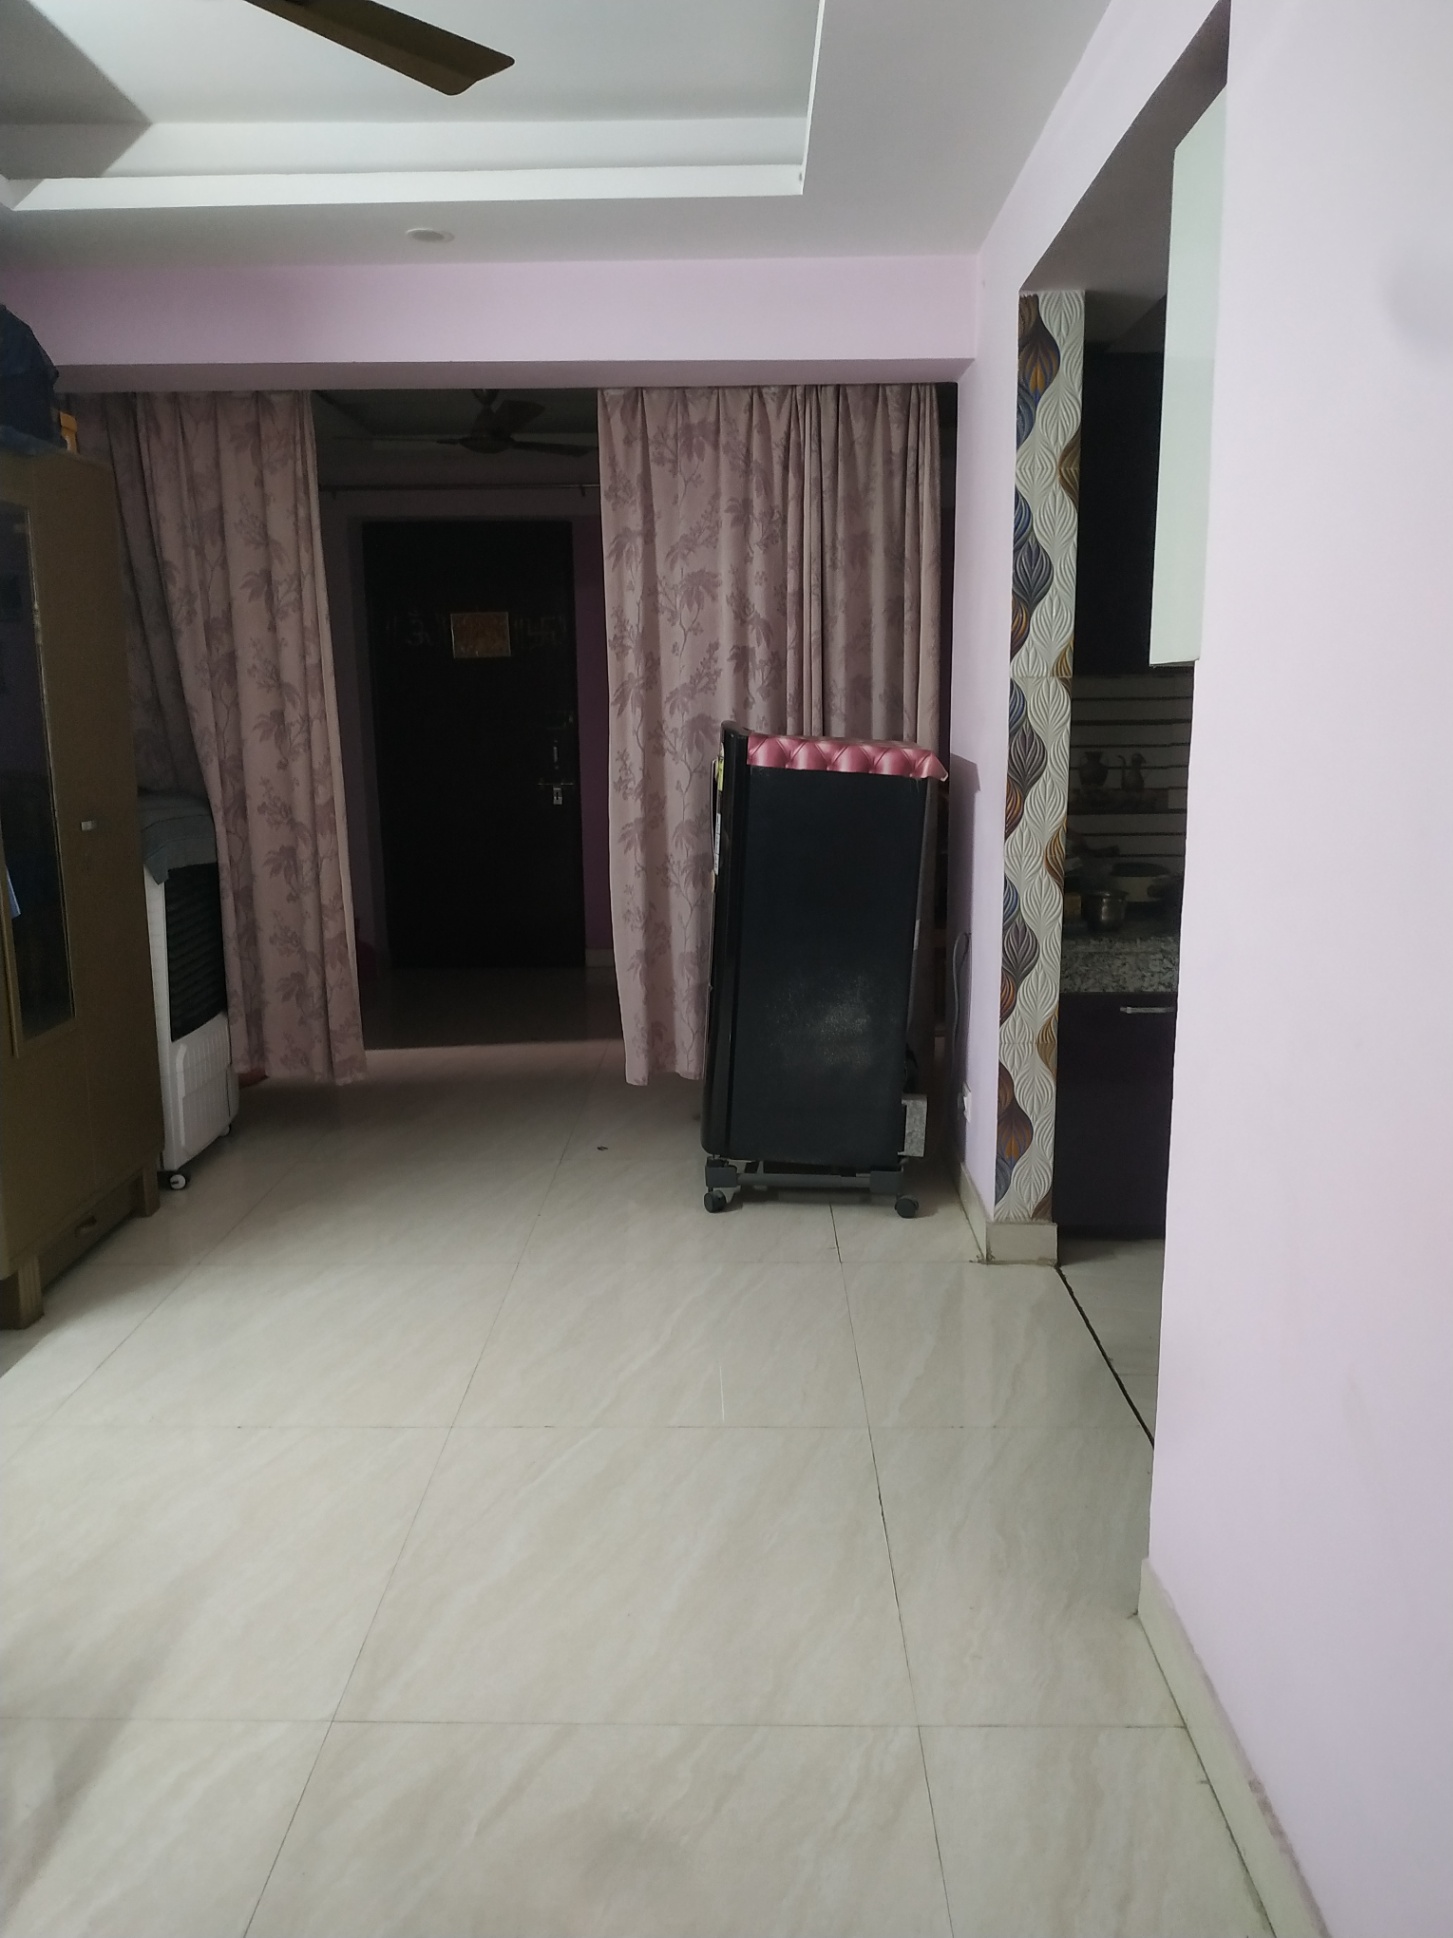 PG/ Roommate for rent @Anant dham housing society noida sector -49